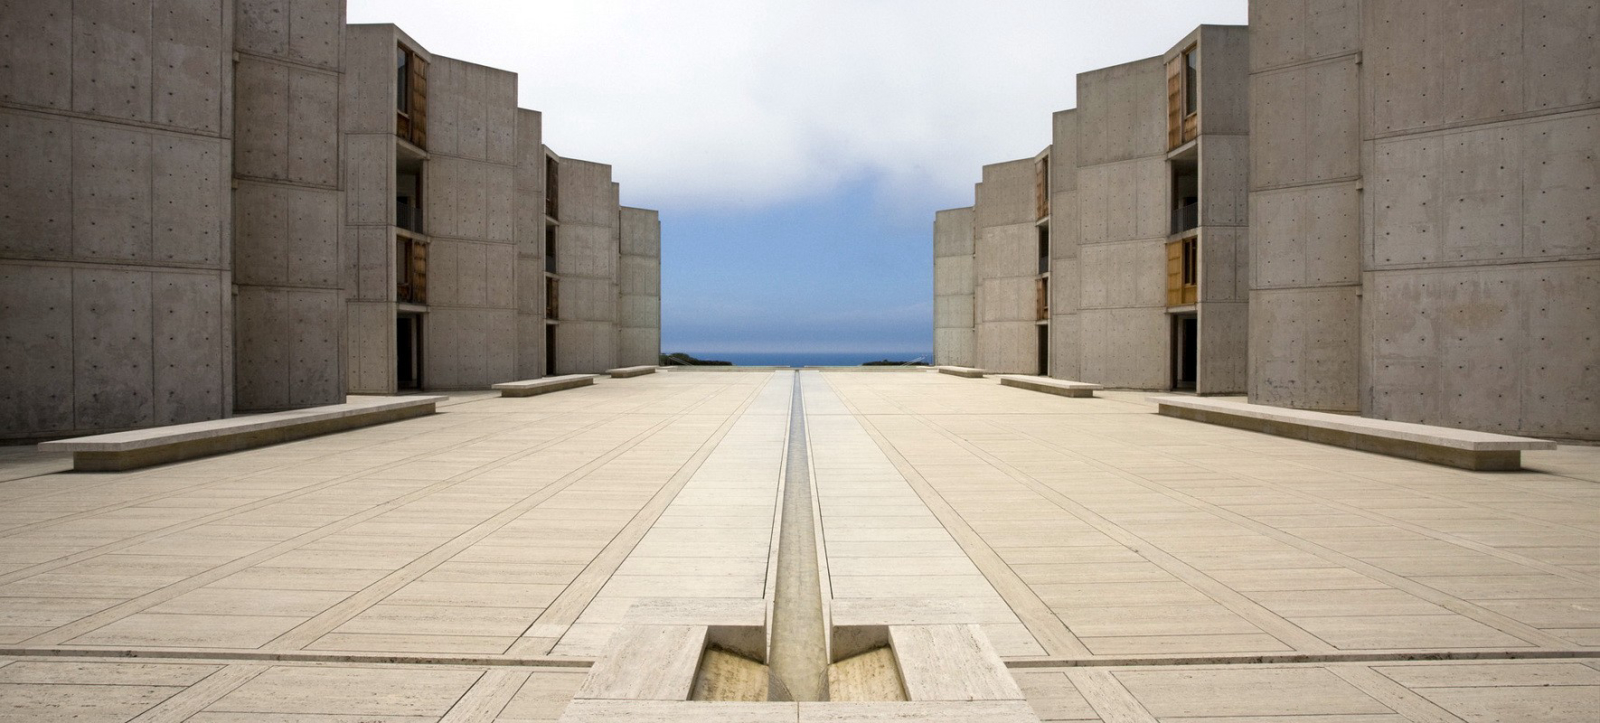 Salk Institute For Biological Studies Images – Browse 49 Stock